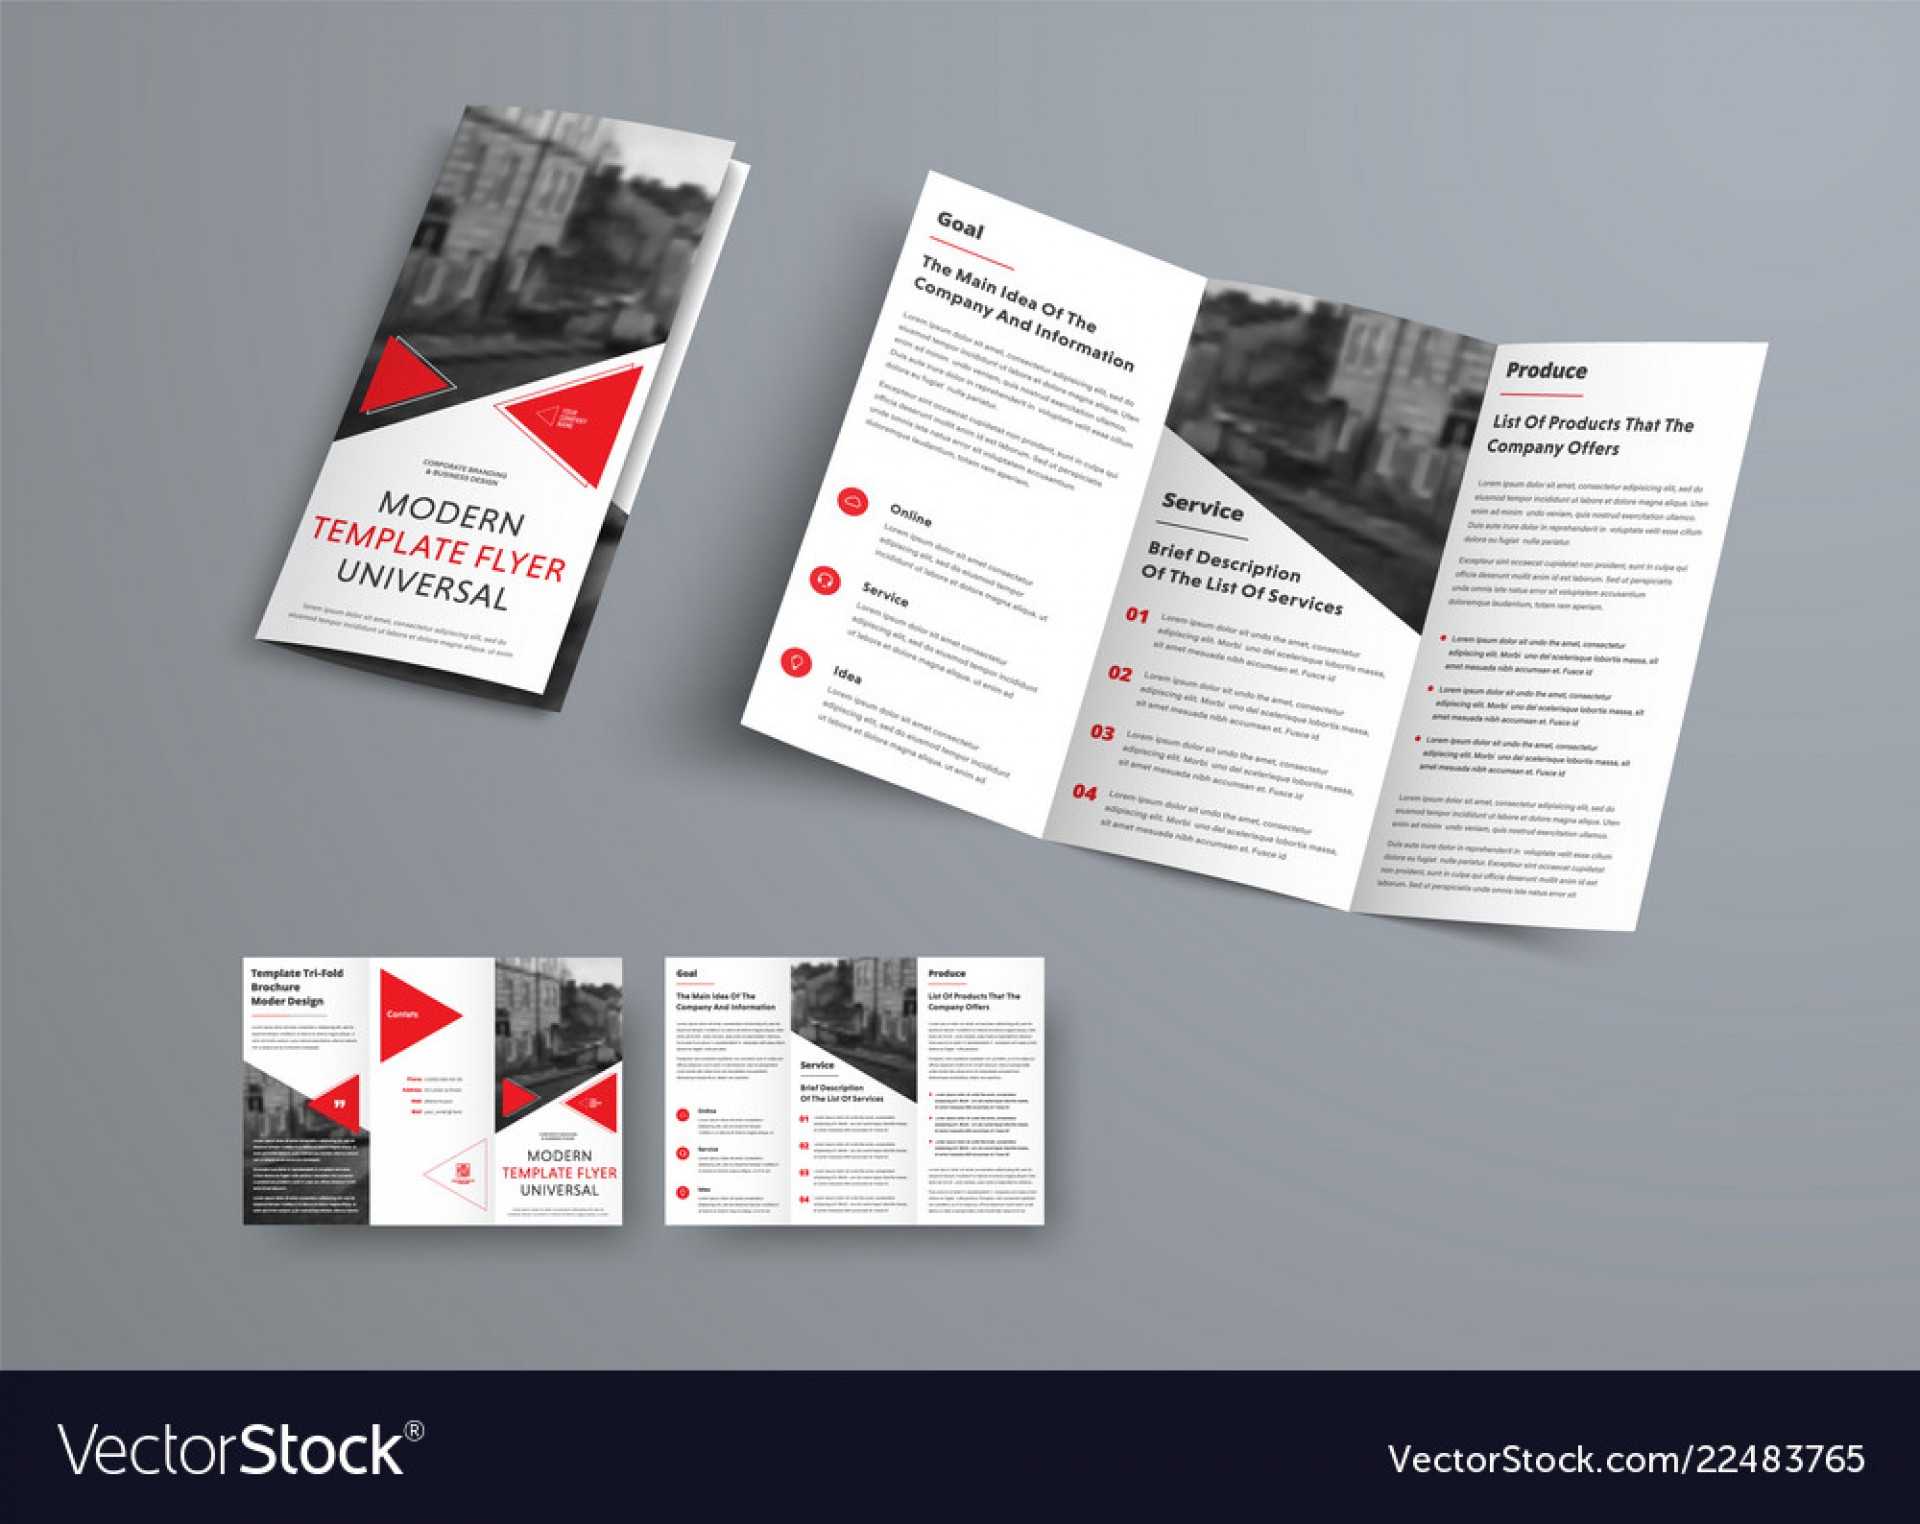 043 Free Trifold Brochure Templates Template Ideas Tri Fold Intended For Free Tri Fold Business Brochure Templates